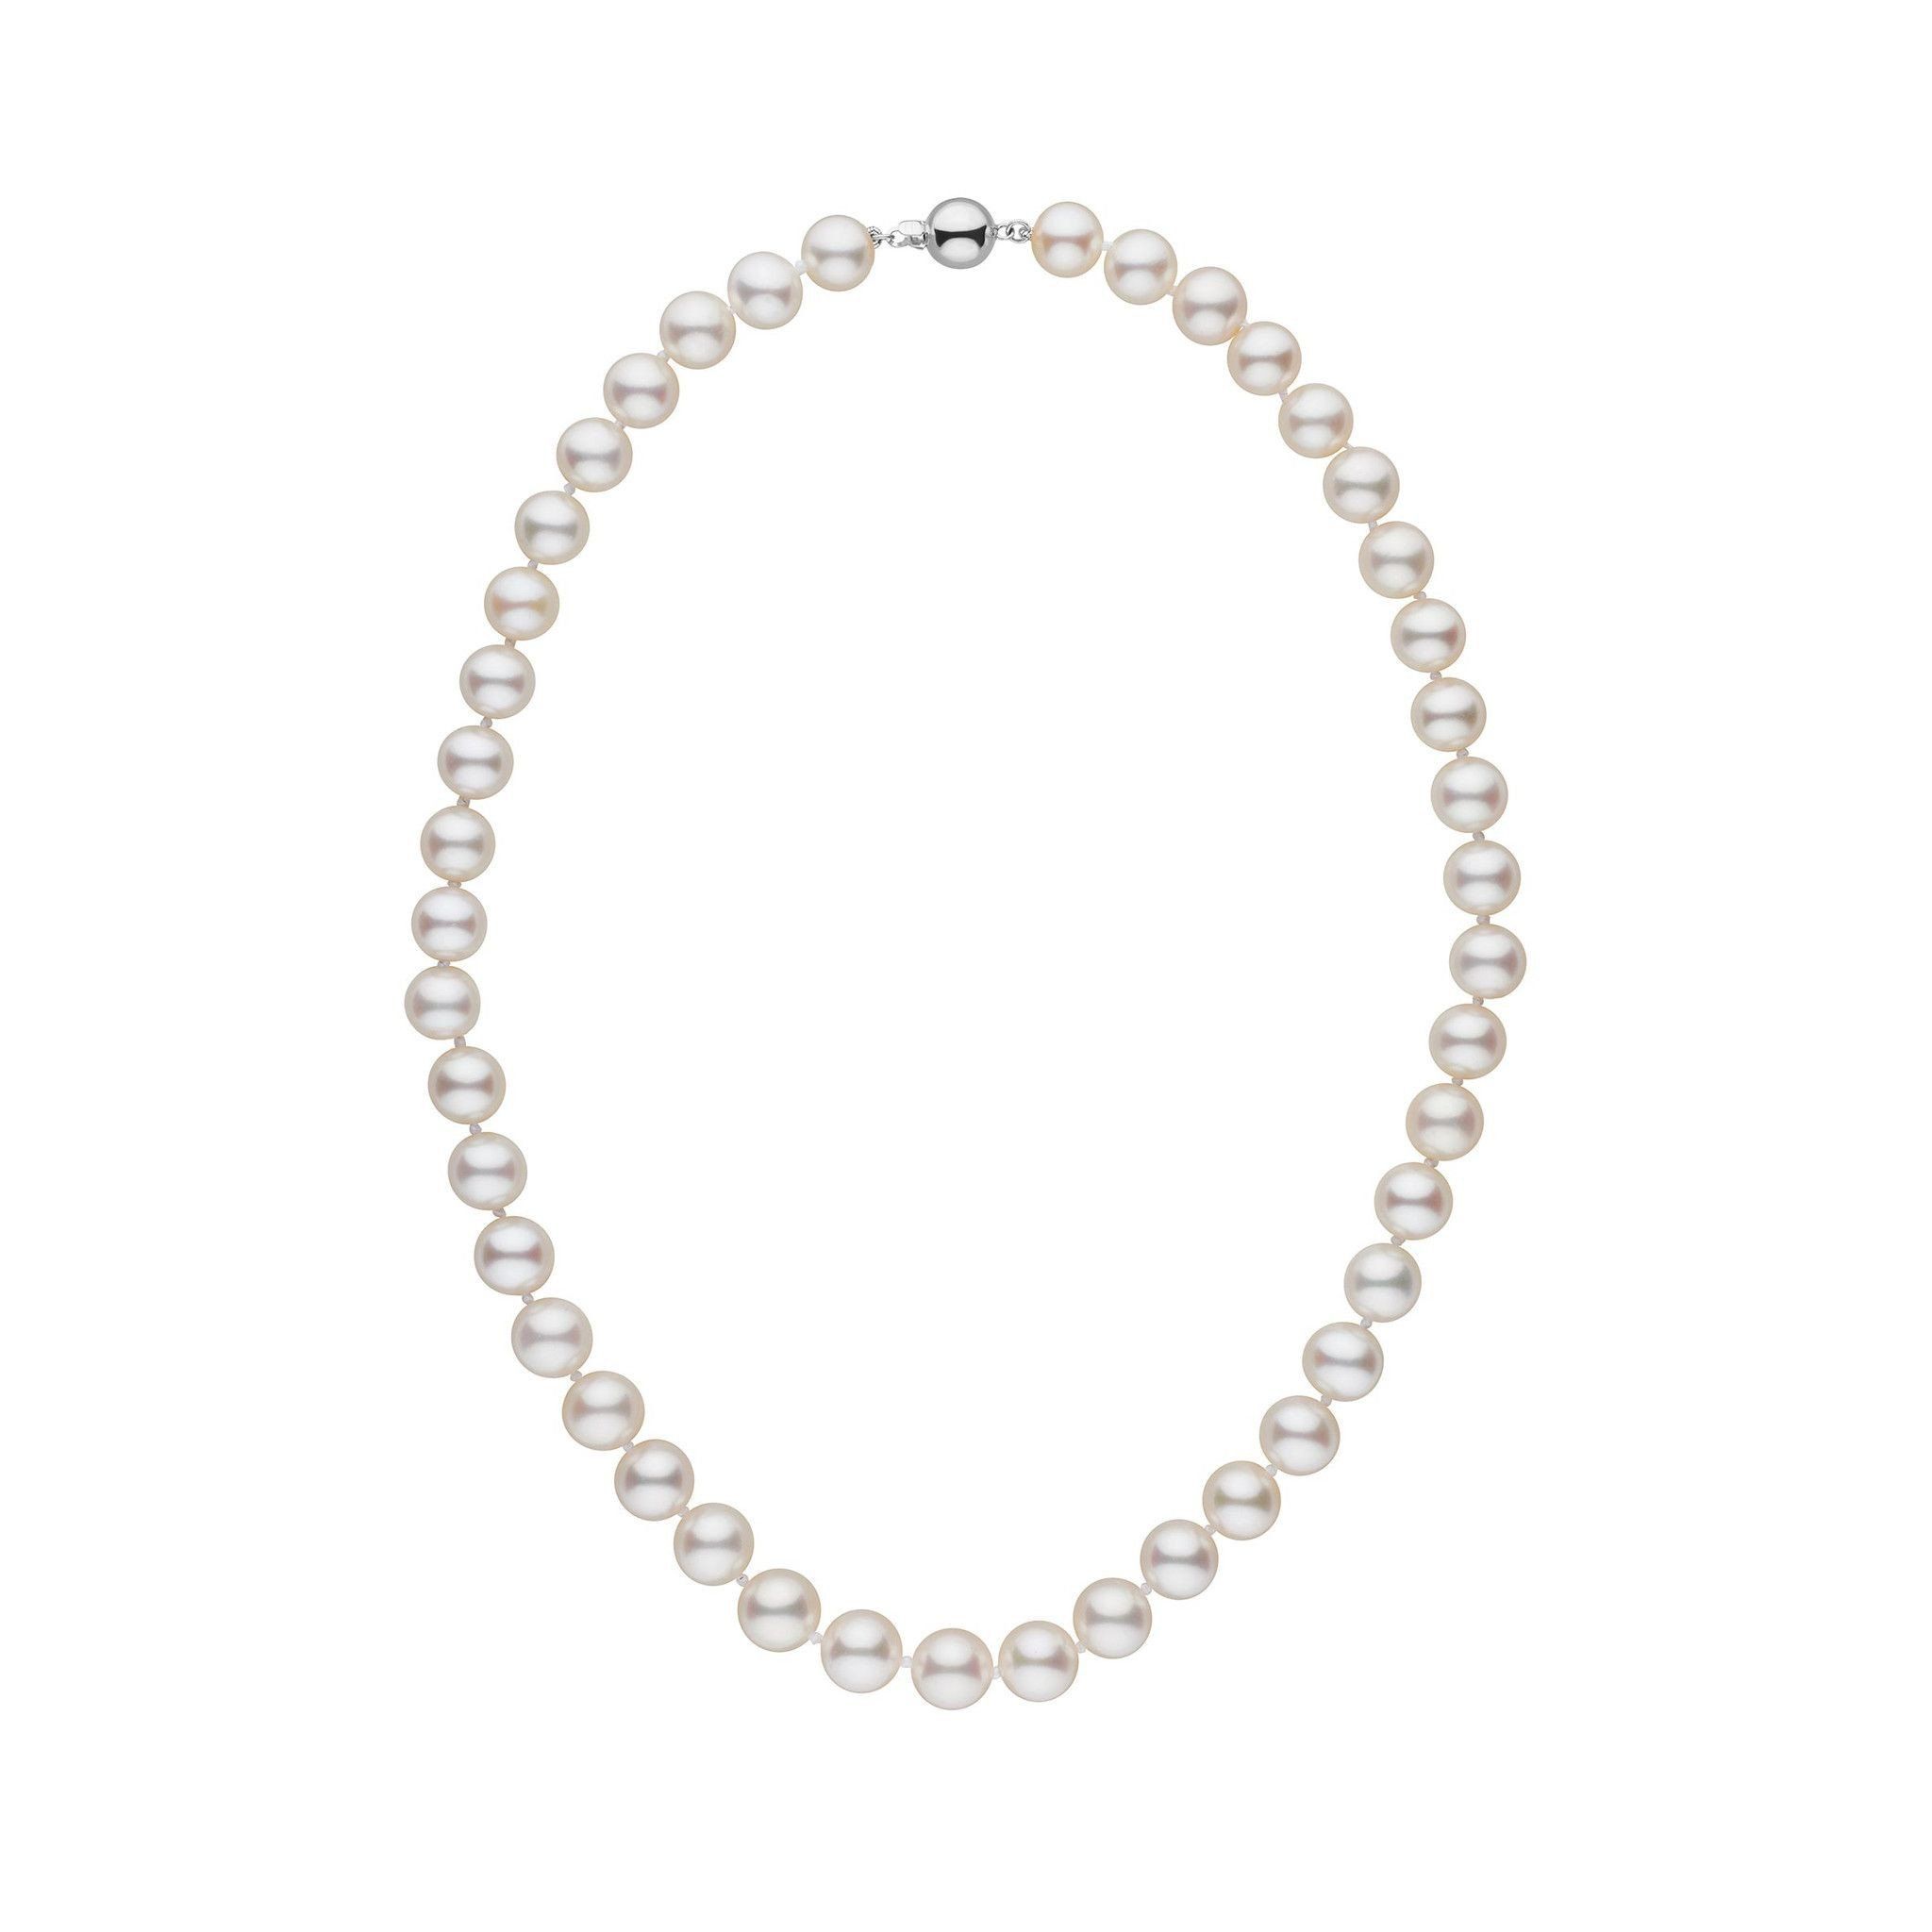 8.5-9.0 mm 16 Inch AAA White Freshwater Pearl Necklace